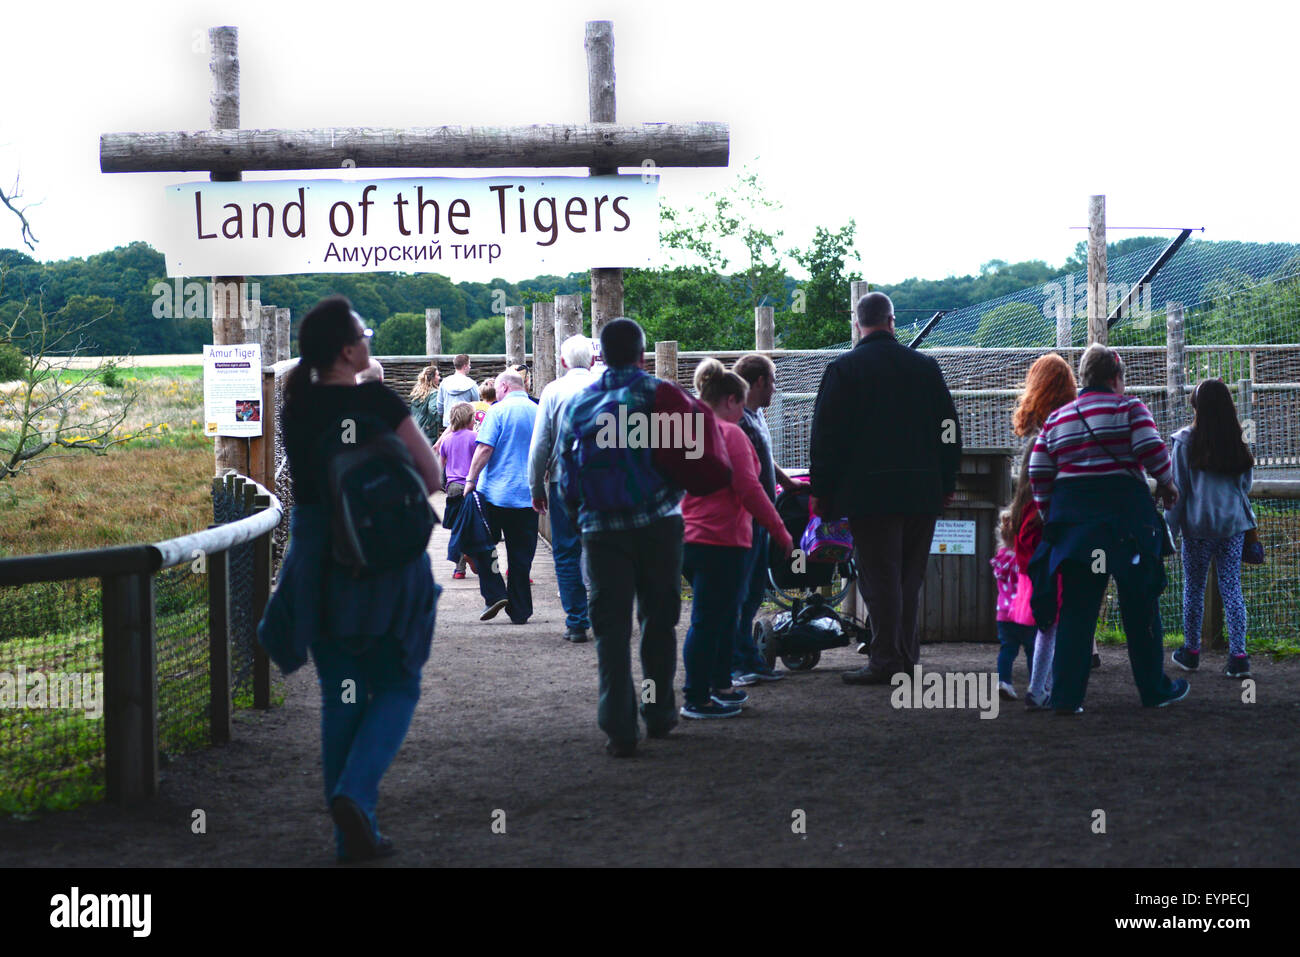 Land of the Tigers entrance at Yorkshire Wildlife Park, Doncaster, South Yorkshire, UK. Picture: Scott Bairstow/Alamy Stock Photo